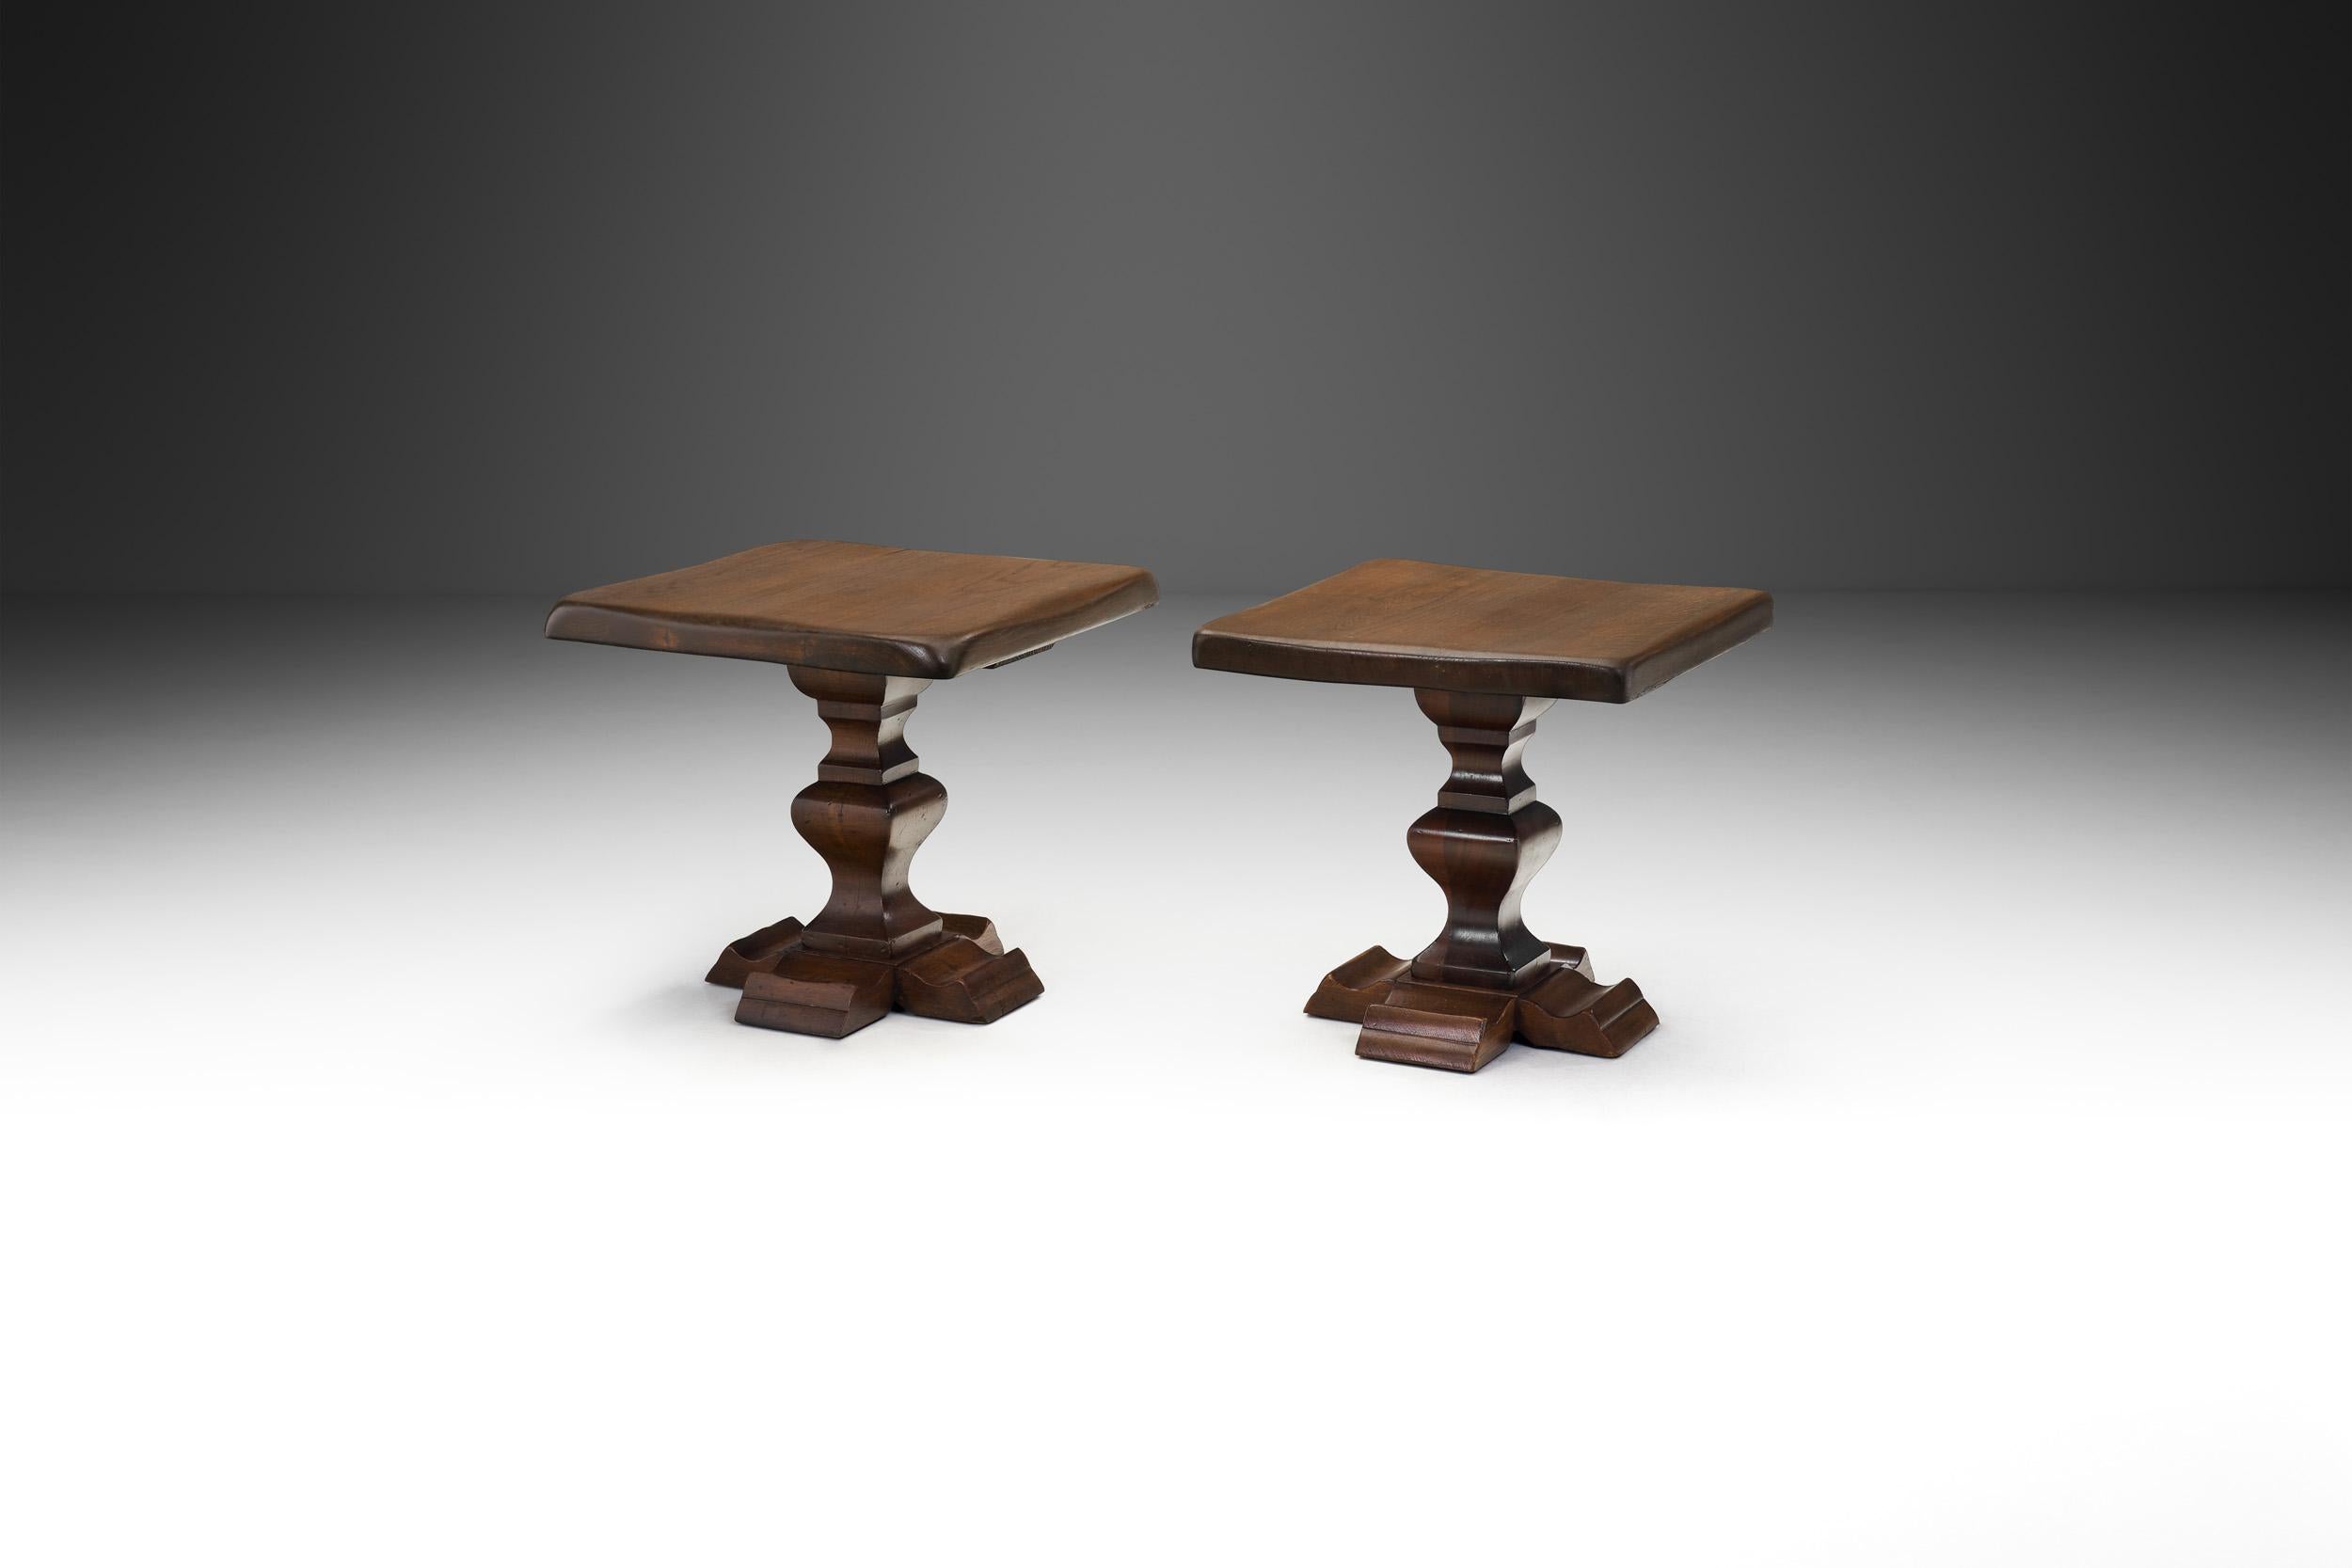 Hand-Crafted Set of Two Handcrafted Wood Side Tables, Europe 1970s